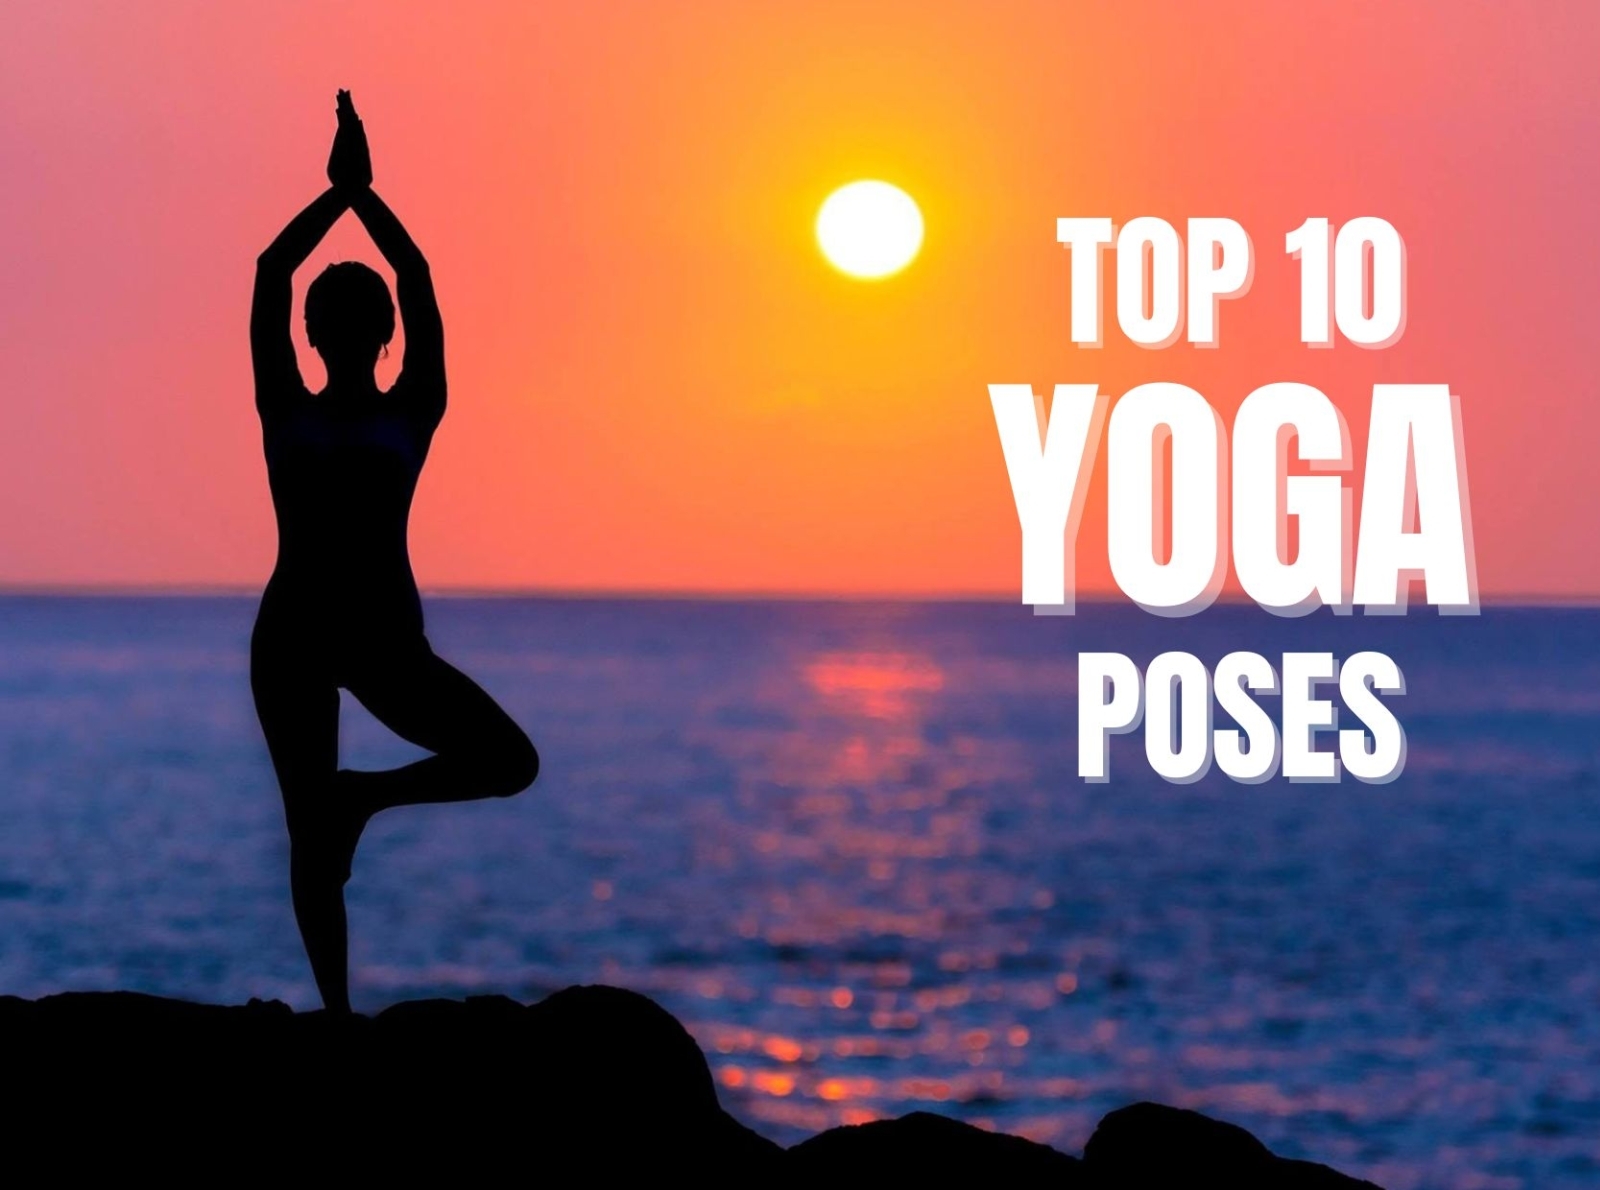 Top 10 Easy Yoga Poses for Beginners by Monthly Feeds on Dribbble